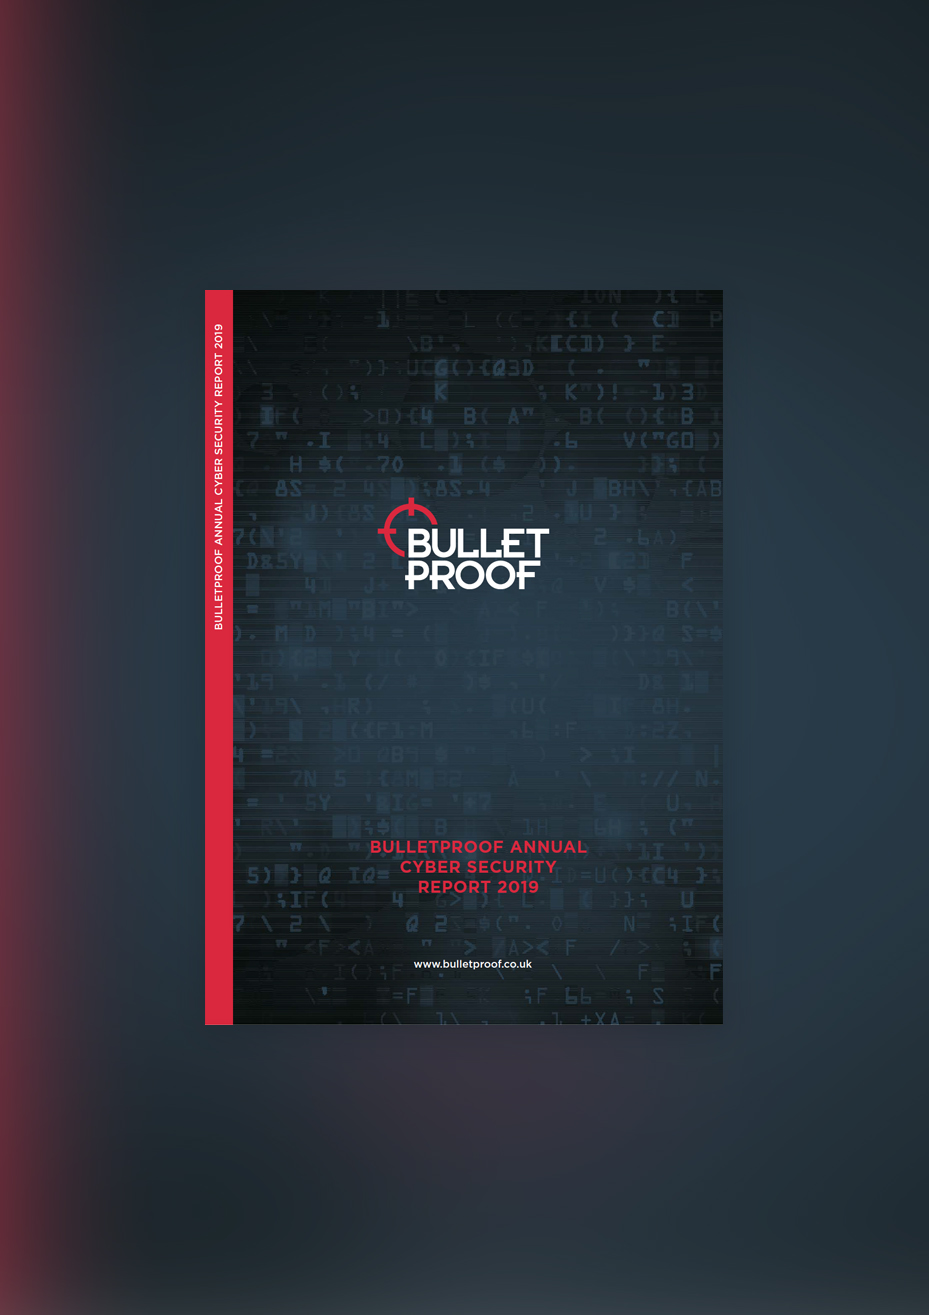 Bulletproof Annual Cyber Security Report 2019